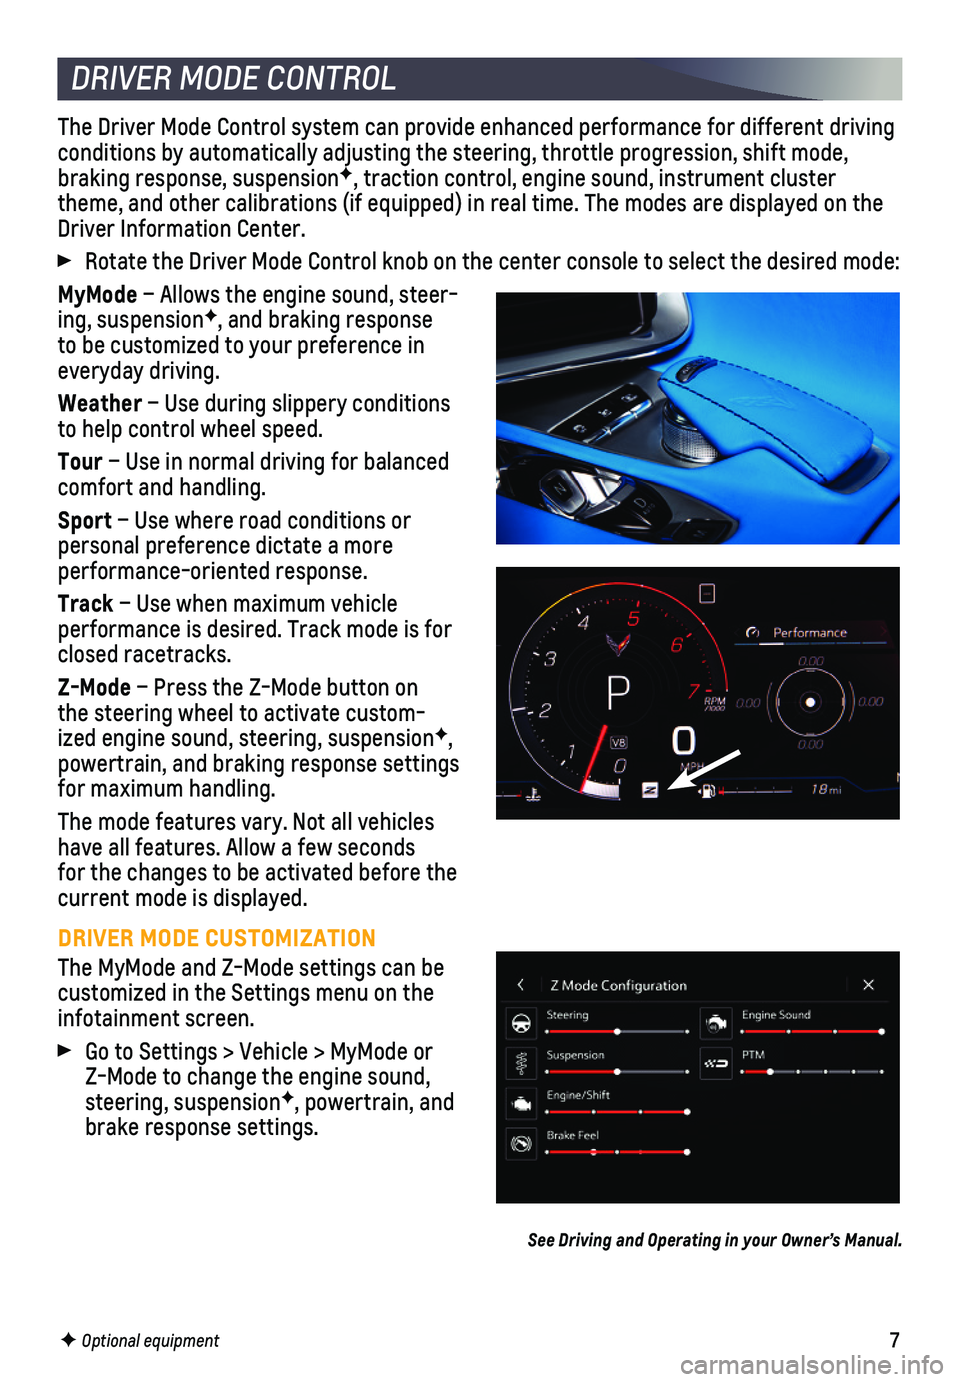 CHEVROLET CORVETTE 2021  Performance Get To Know Guide 7
The Driver Mode Control system can provide enhanced performance for diff\
erent  driving conditions by automatically adjusting the steering, throttle progression\
, shift mode, braking response, sus